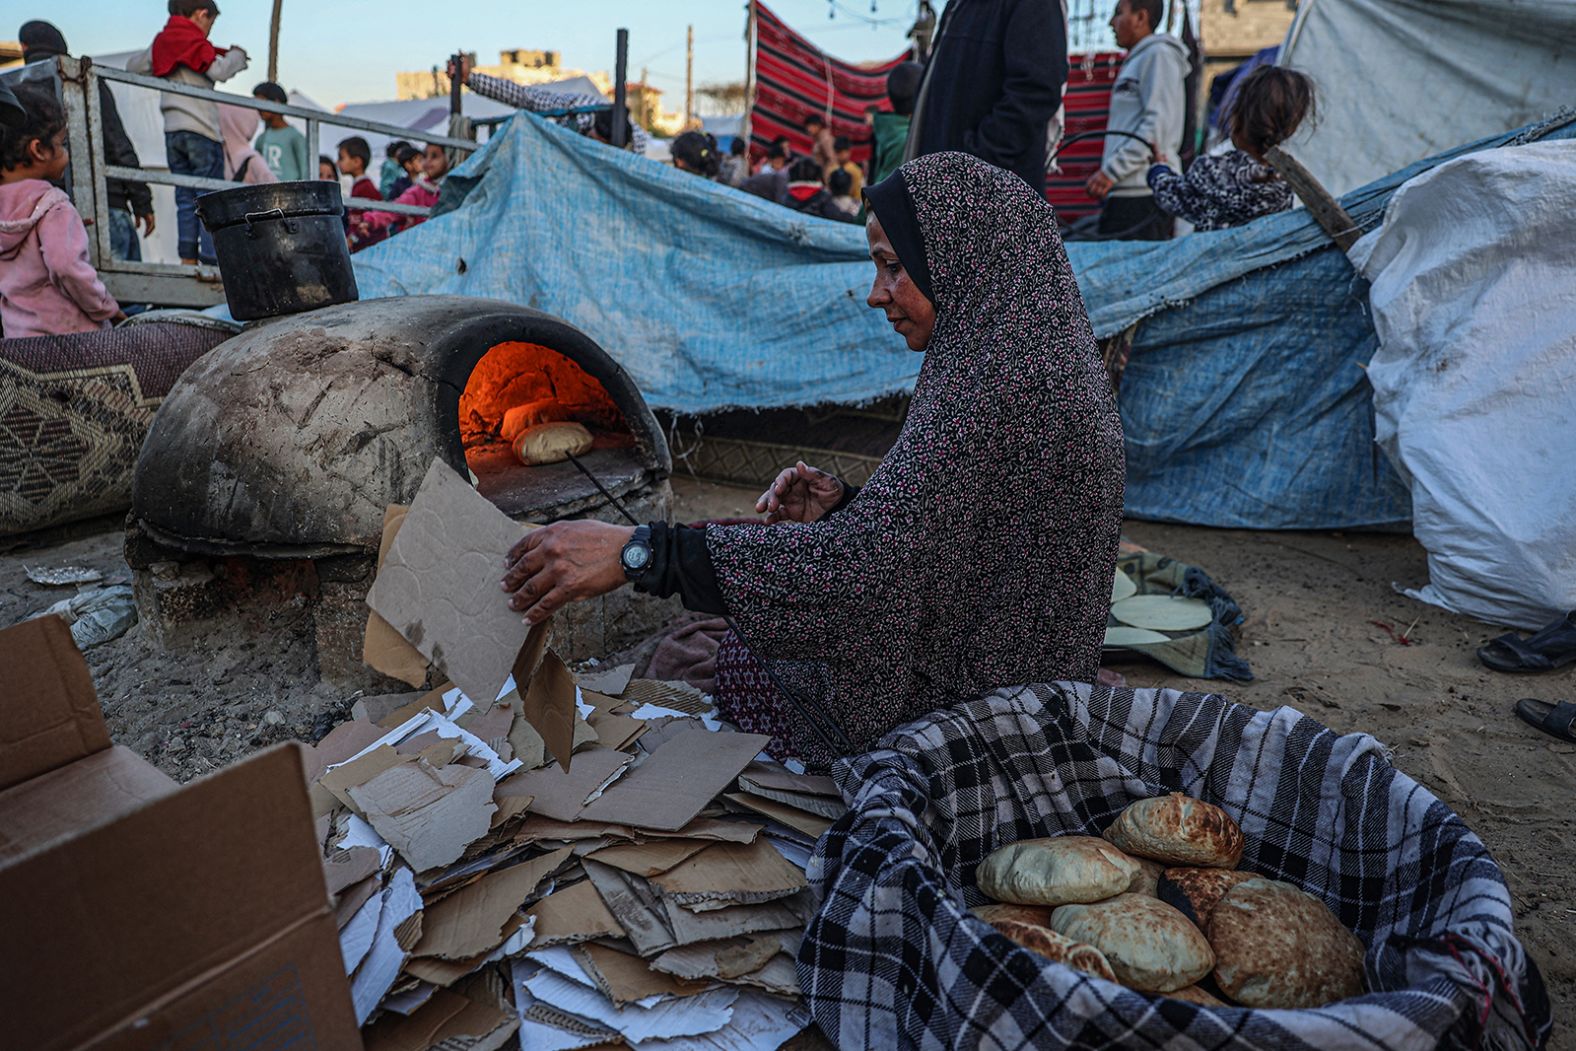 A displaced Palestinian woman bakes bread before an iftar meal in Rafah, Gaza. On Monday United Nations Secretary-General Antonio Guterres called on all involved in the <a href="index.php?page=&url=http%3A%2F%2Fwww.cnn.com%2F2023%2F10%2F07%2Fworld%2Fgallery%2Fisrael-gaza-attack-2023%2Findex.html" target="_blank">conflict between Israel and Hamas</a> to "honor the spirit of Ramadan by silencing the guns," and to remove all obstacles to ensure the delivery of aid, amid a <a href="index.php?page=&url=http%3A%2F%2Fwww.cnn.com%2F2024%2F03%2F07%2Fworld%2Fgallery%2Fgaza-hunger-malnutrition%2Findex.html" target="_blank">growing hunger crisis</a> in Gaza.